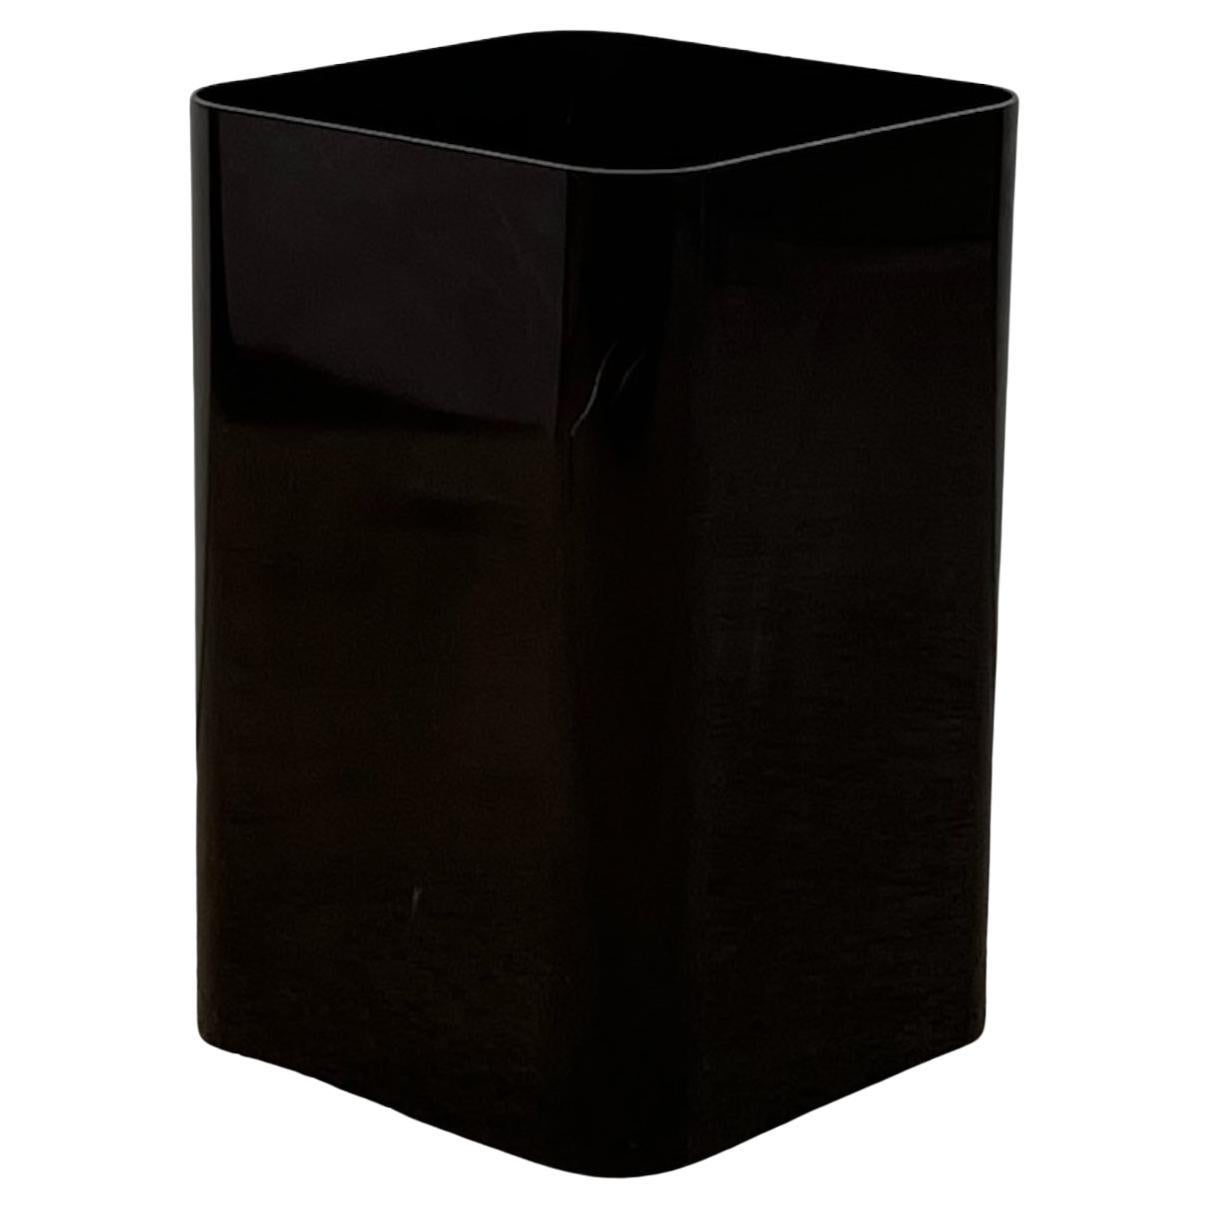 Paper basket in dark brown plastic model 4672, designed by Ufficio Tecnico Kartell and produced by Kartell in the 70s.

This square base basket has rounded edges, a signature of the iconic Componibili series designed by Anna Castelli Ferrieri in the